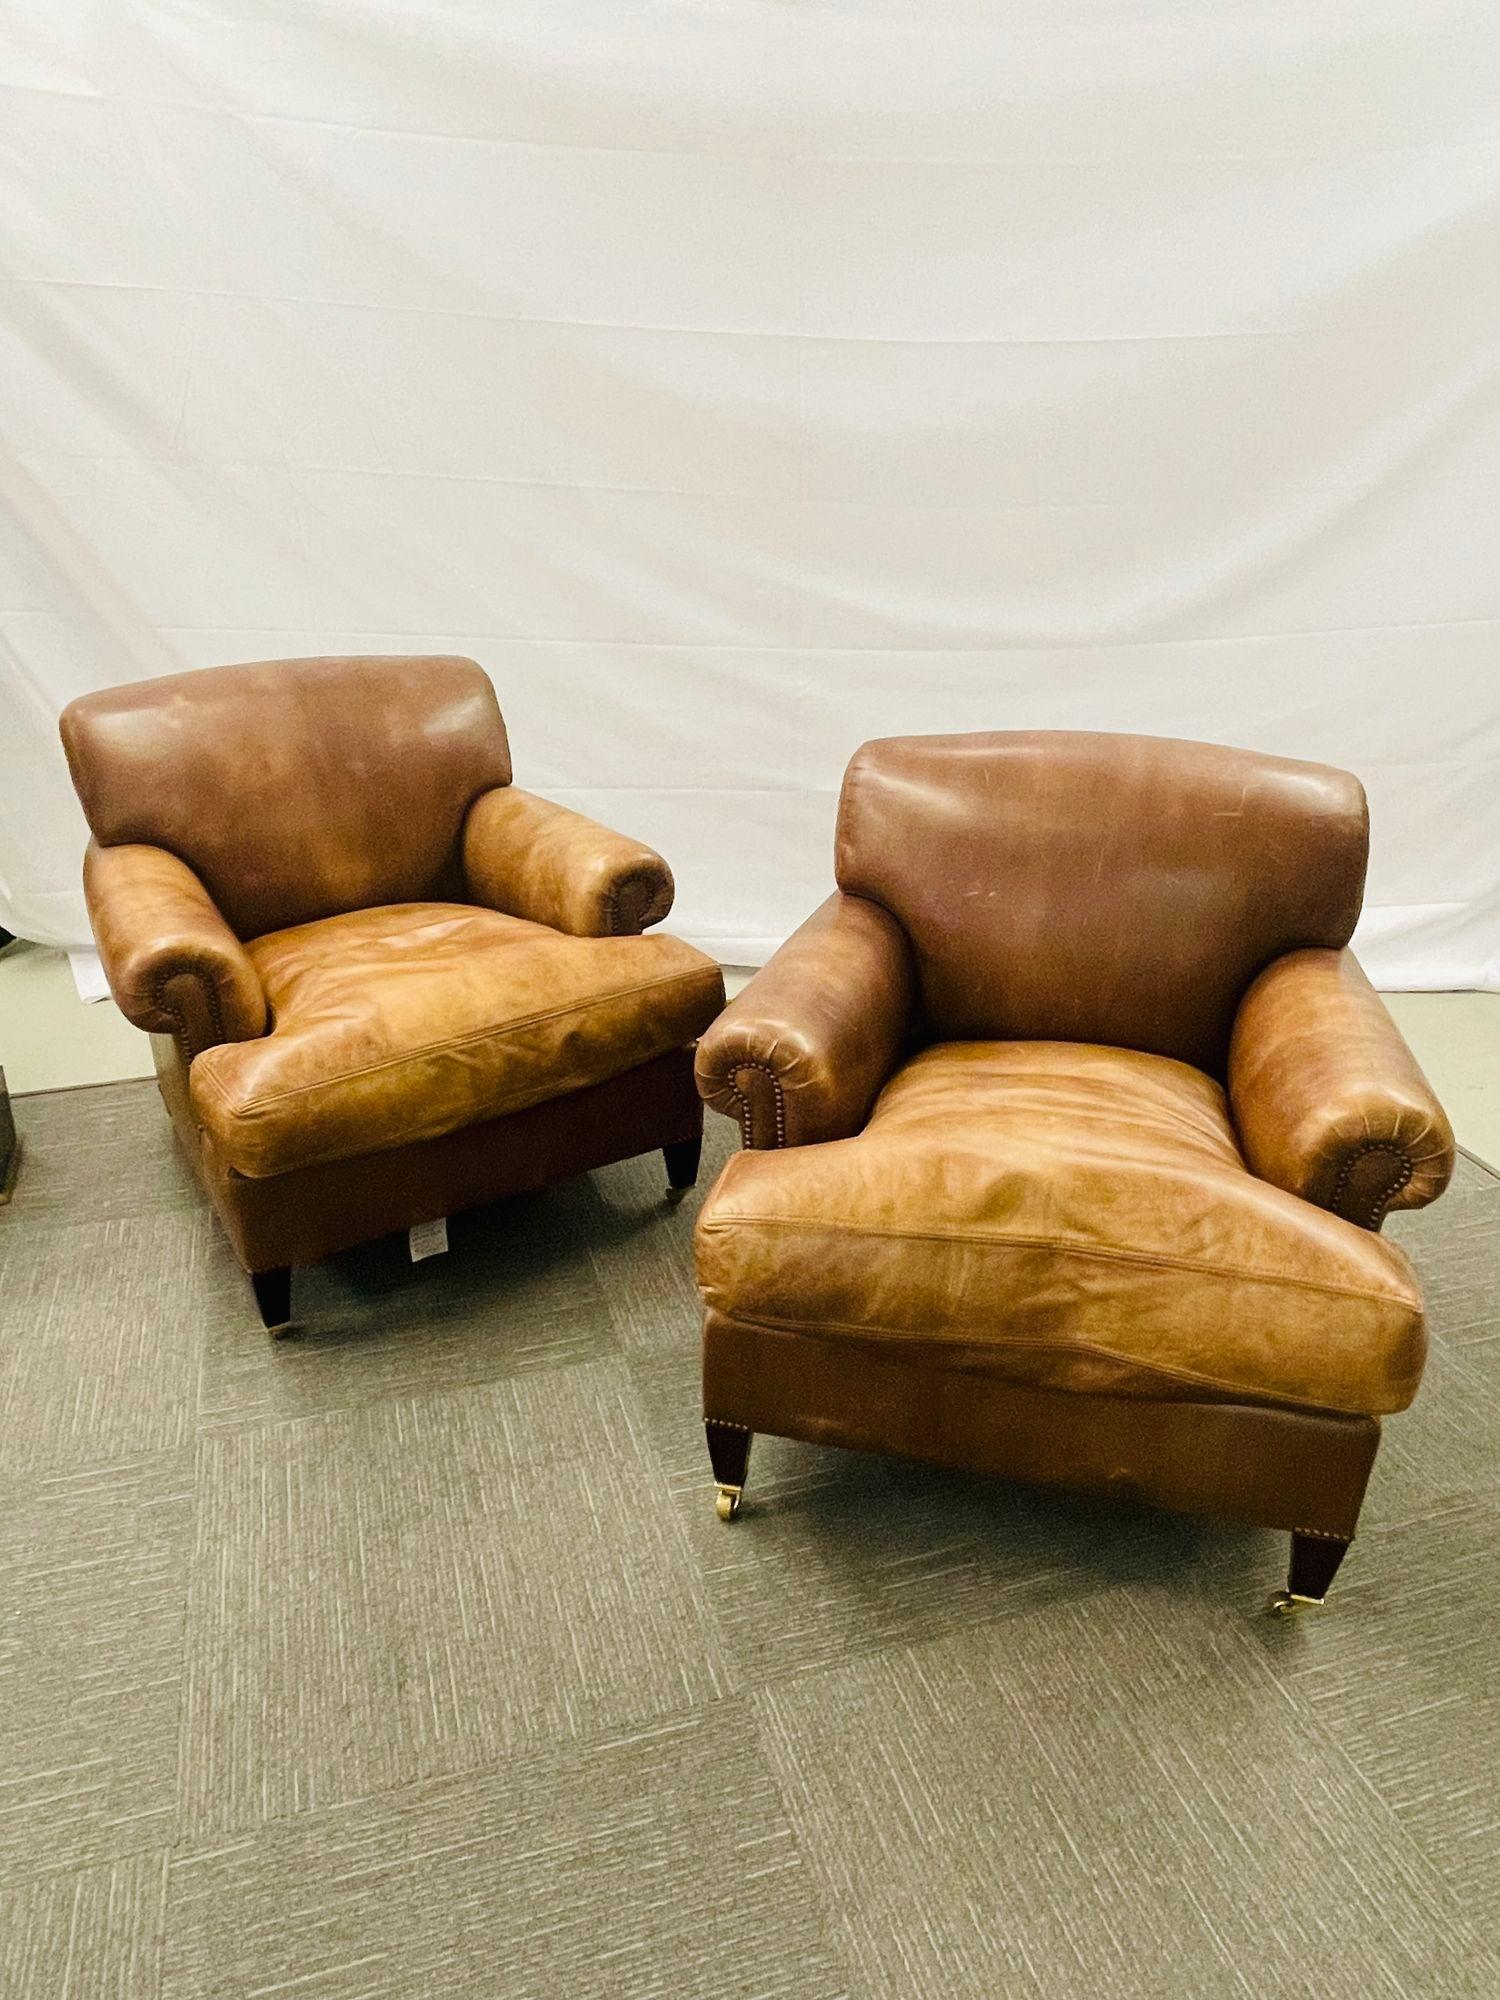 English Pair of George Smith Leather Upholstered Armchairs, Scroll Arm or Cigar